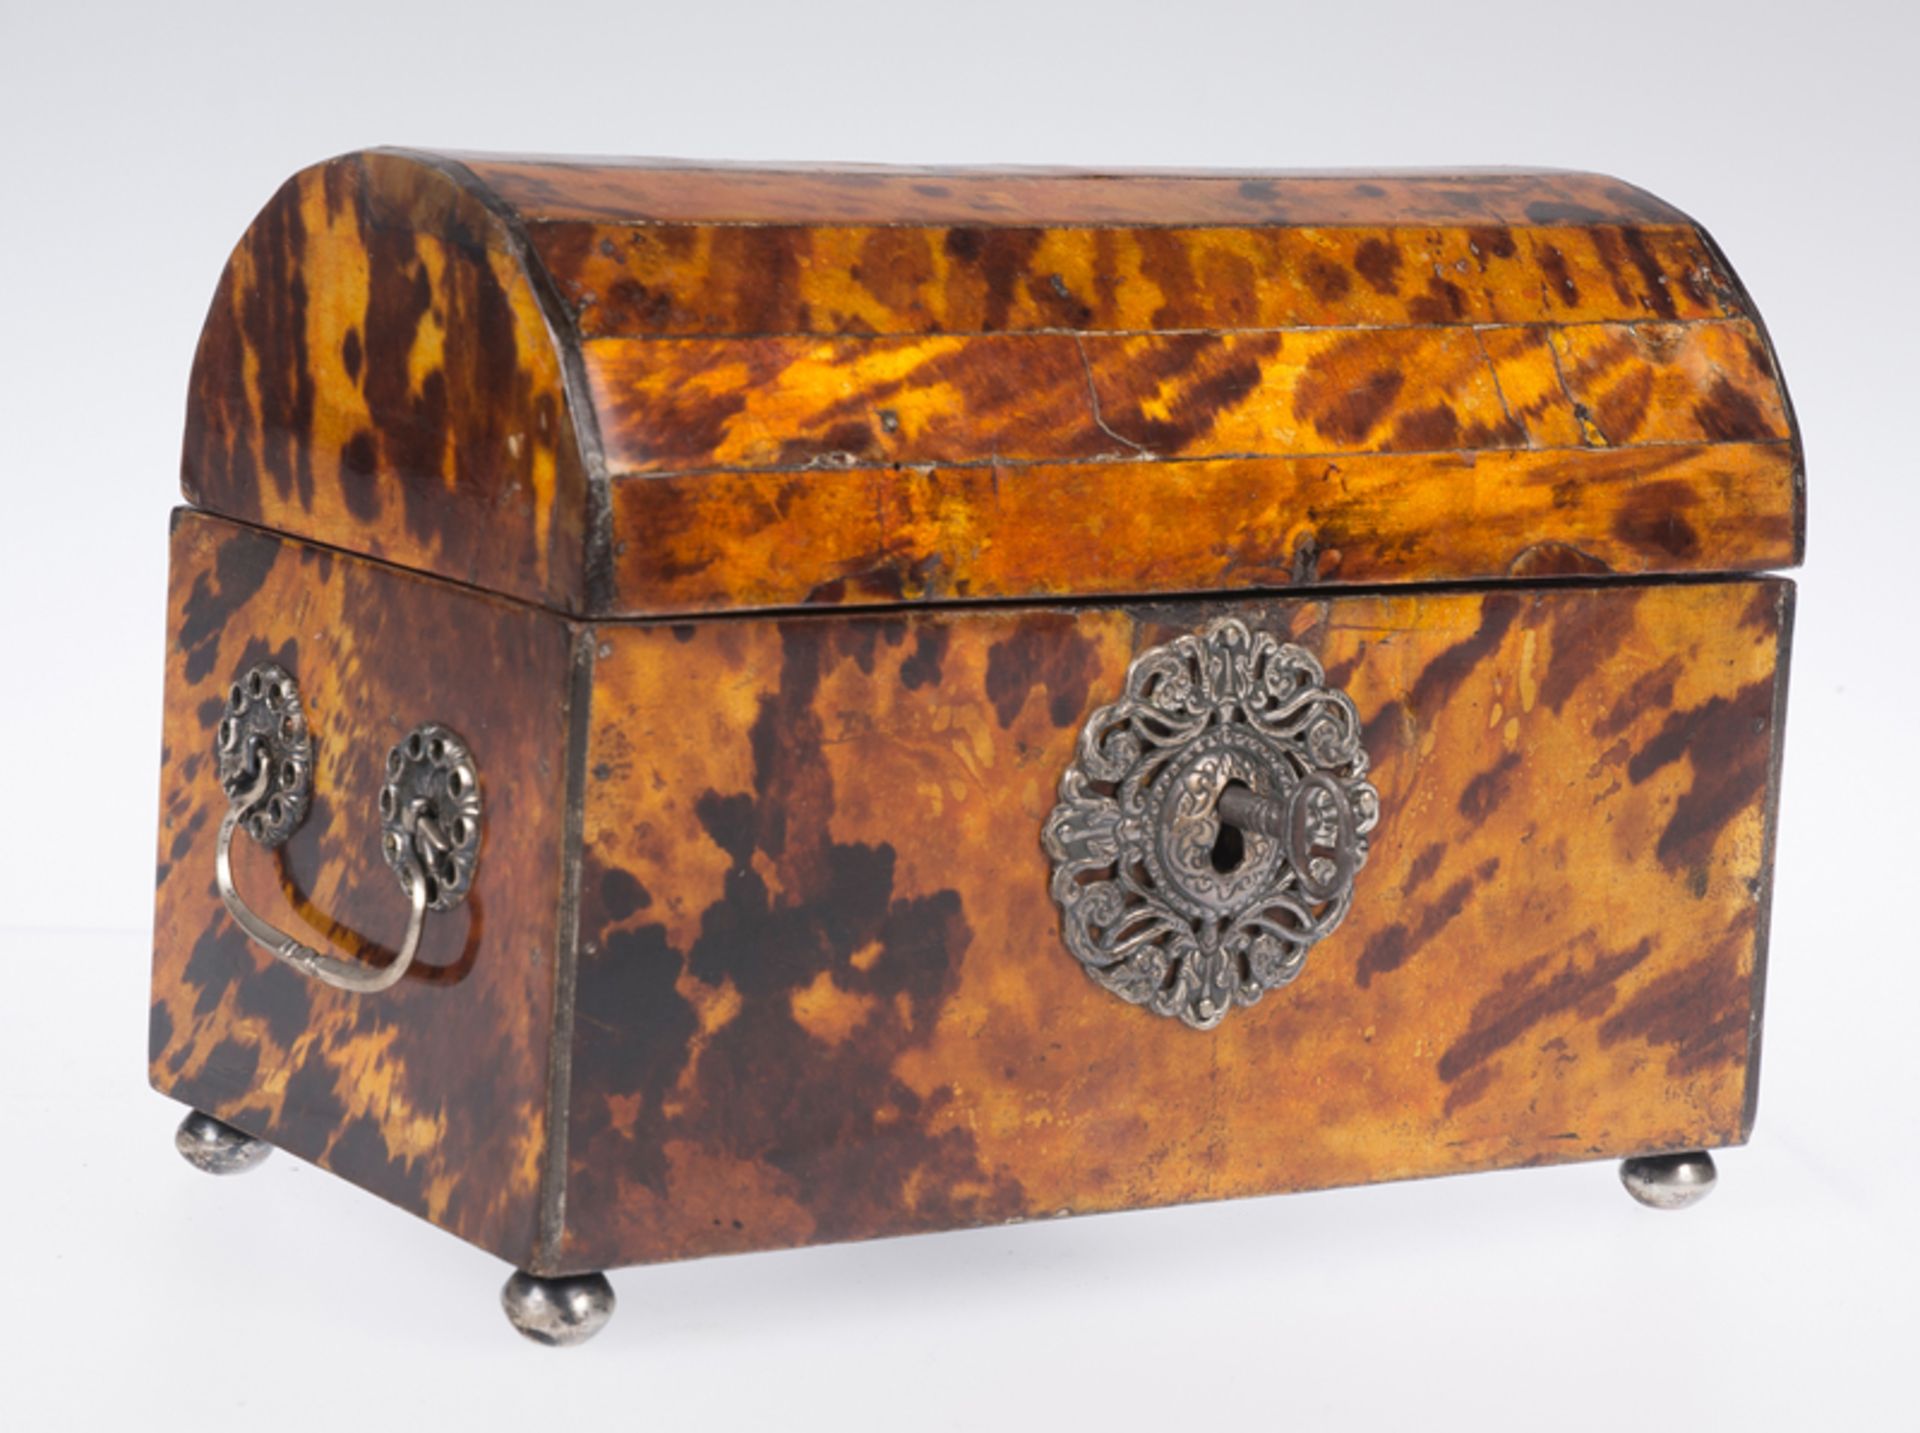 Wooden box covered in tortoiseshell. Colonial work. Mexico. 18th century Wooden box covered in - Image 5 of 6